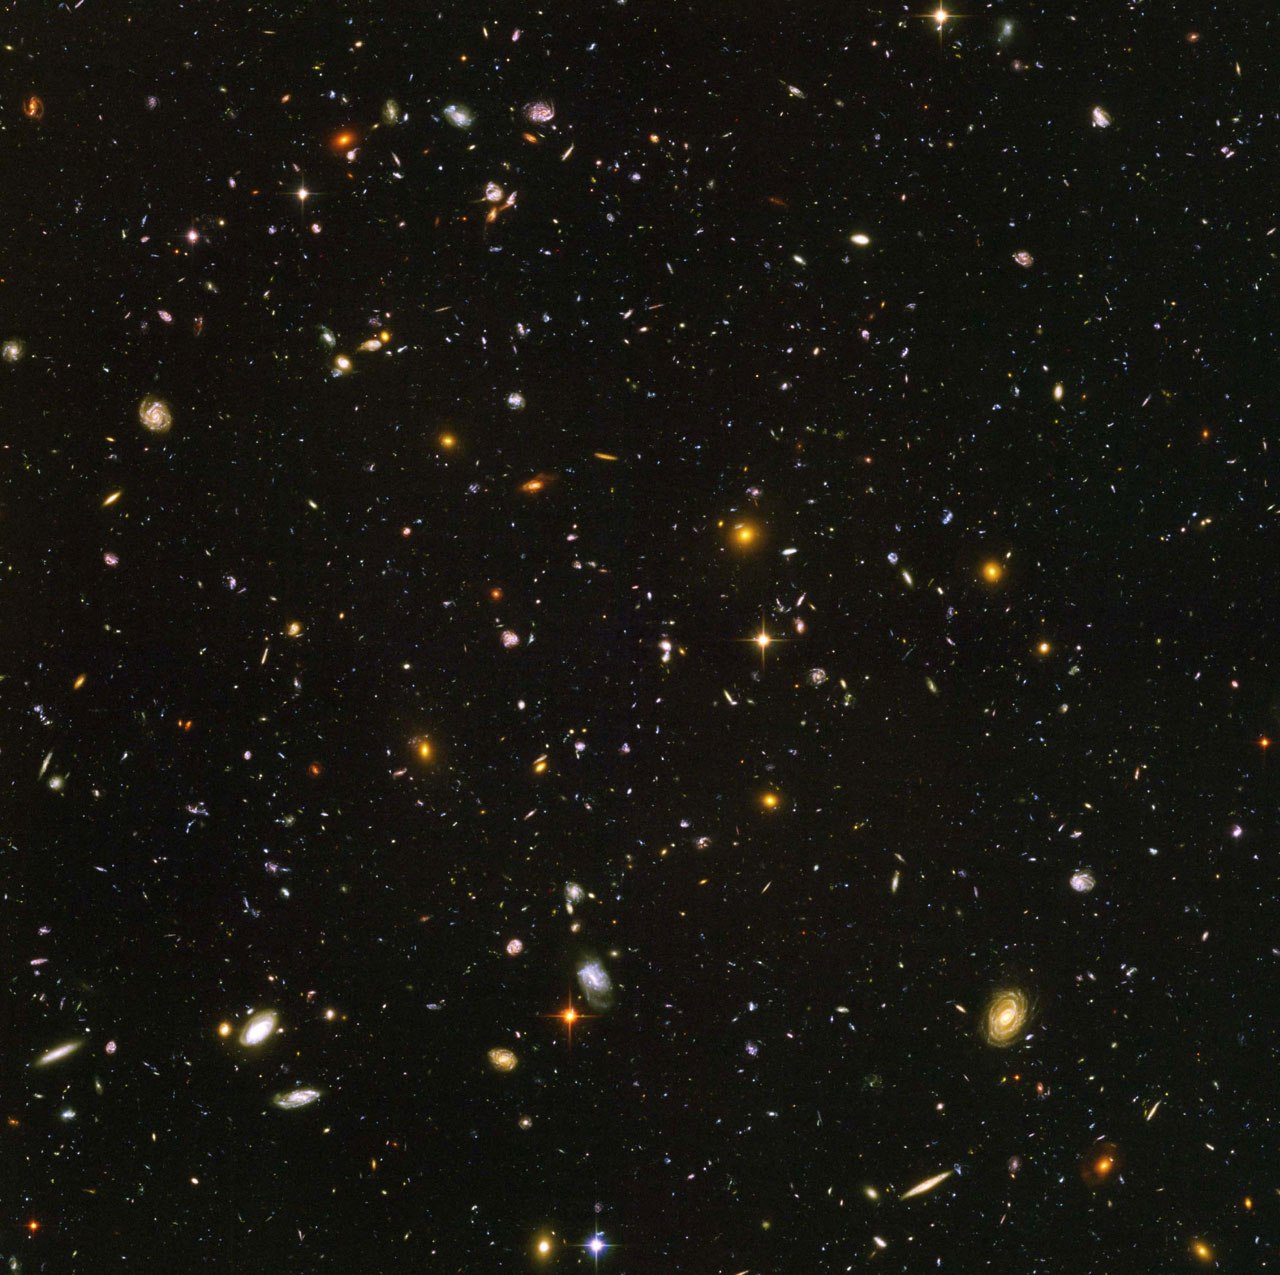 Hubble Digs Deeply - Credit: NASA/ESA/S. Beckwith(STScI) and The HUDF Team